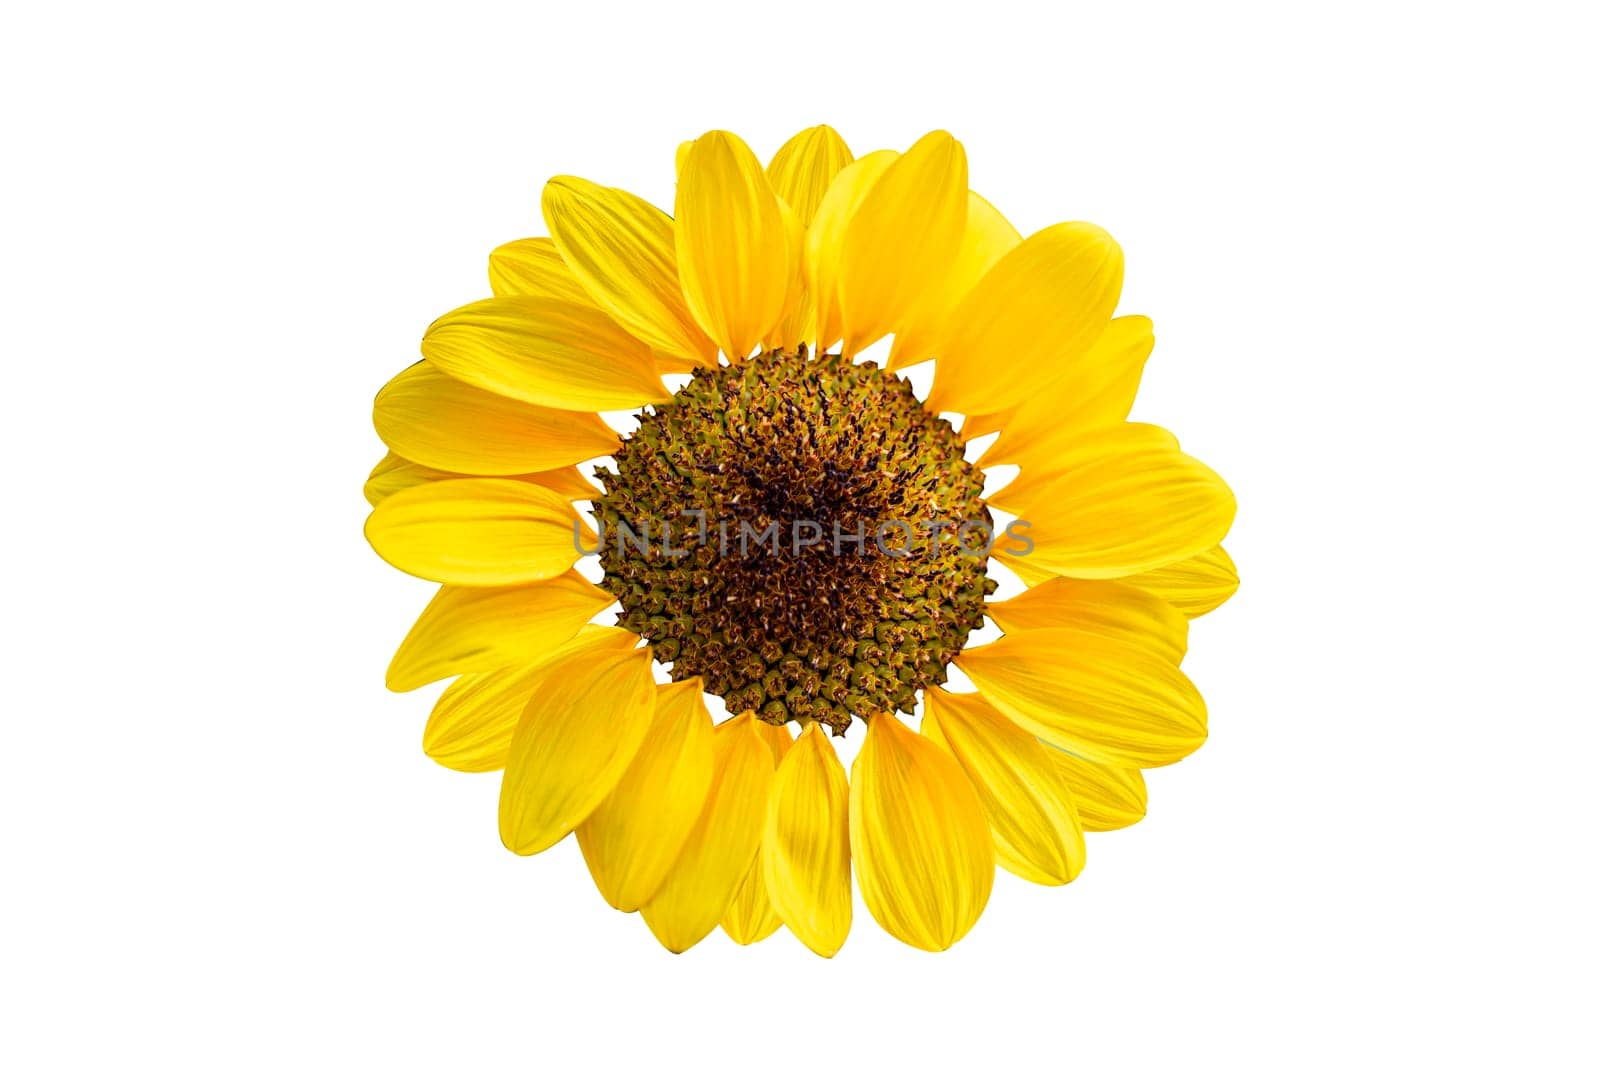 Sunflower isolated on white background with clipping path.